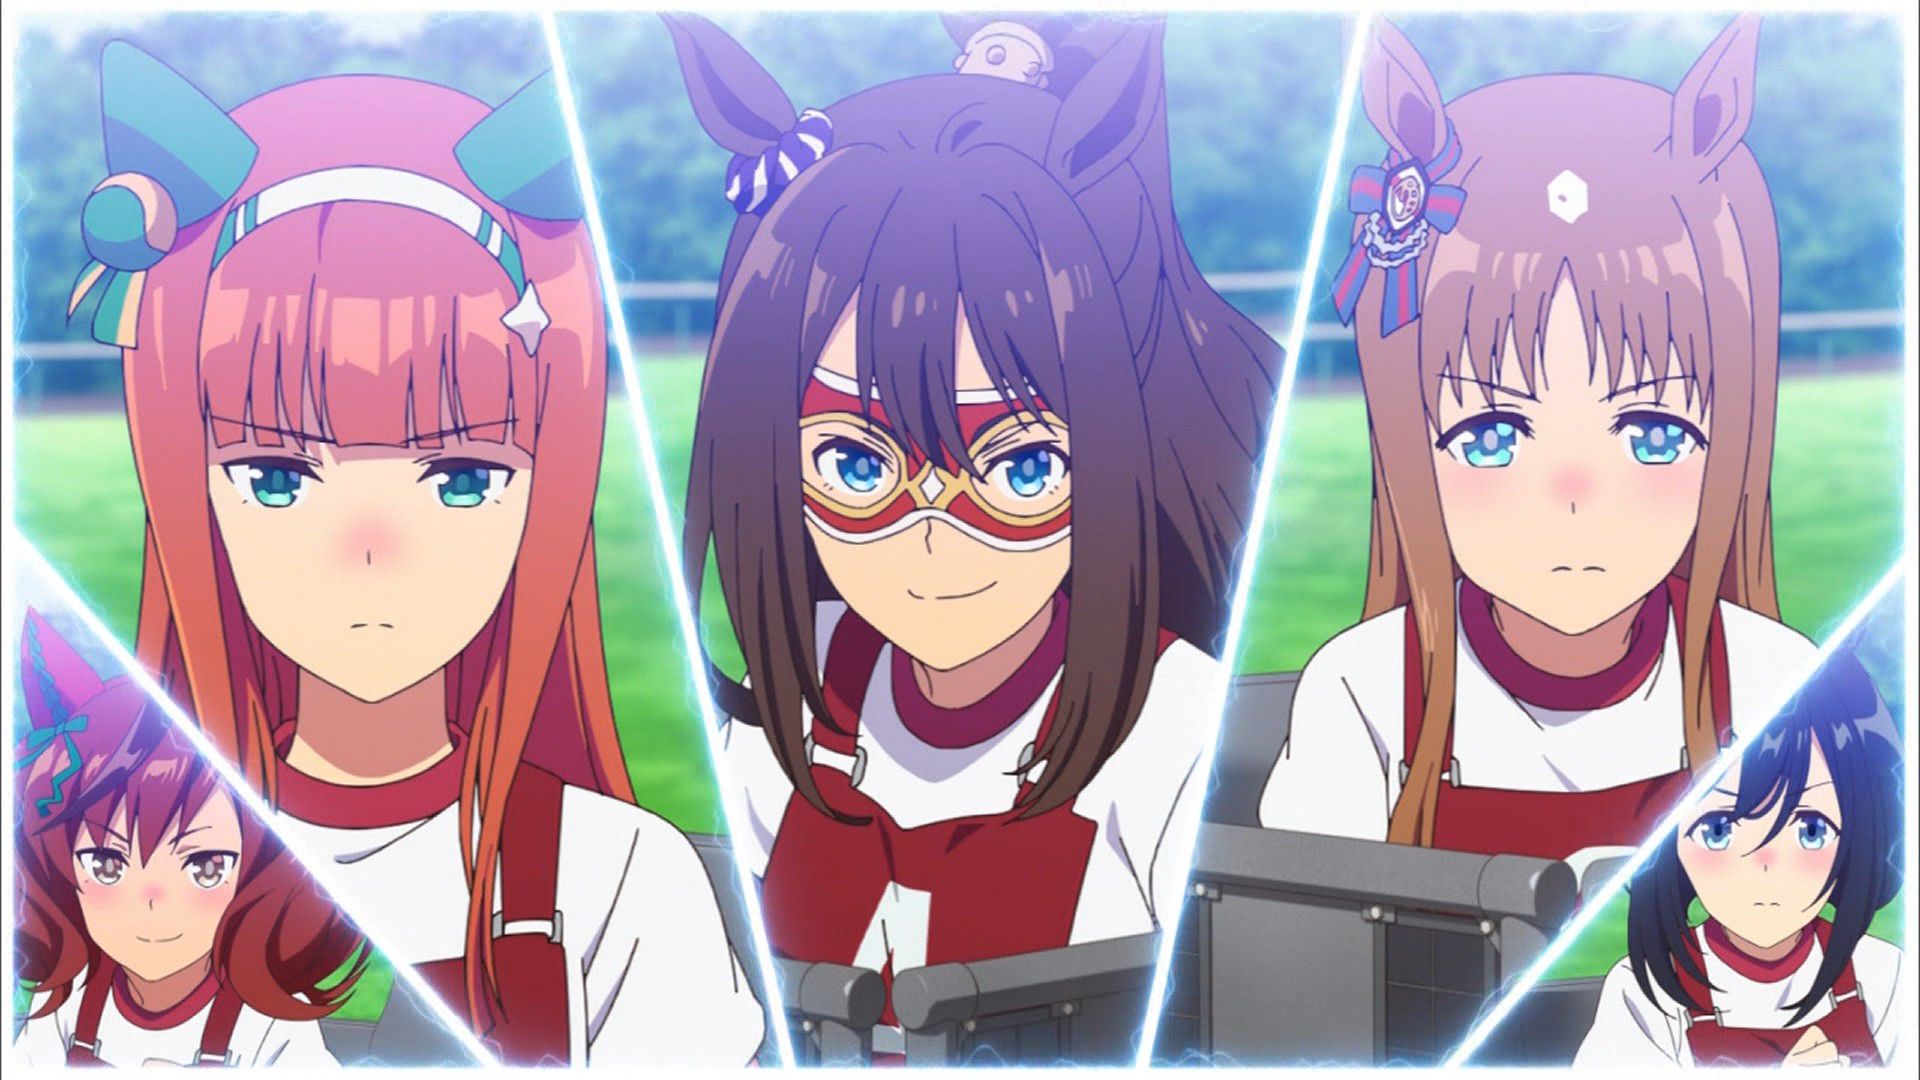 "Uma Musume pretty Derby" 6 episodes, unexpectedly interesting wwwwwww 12